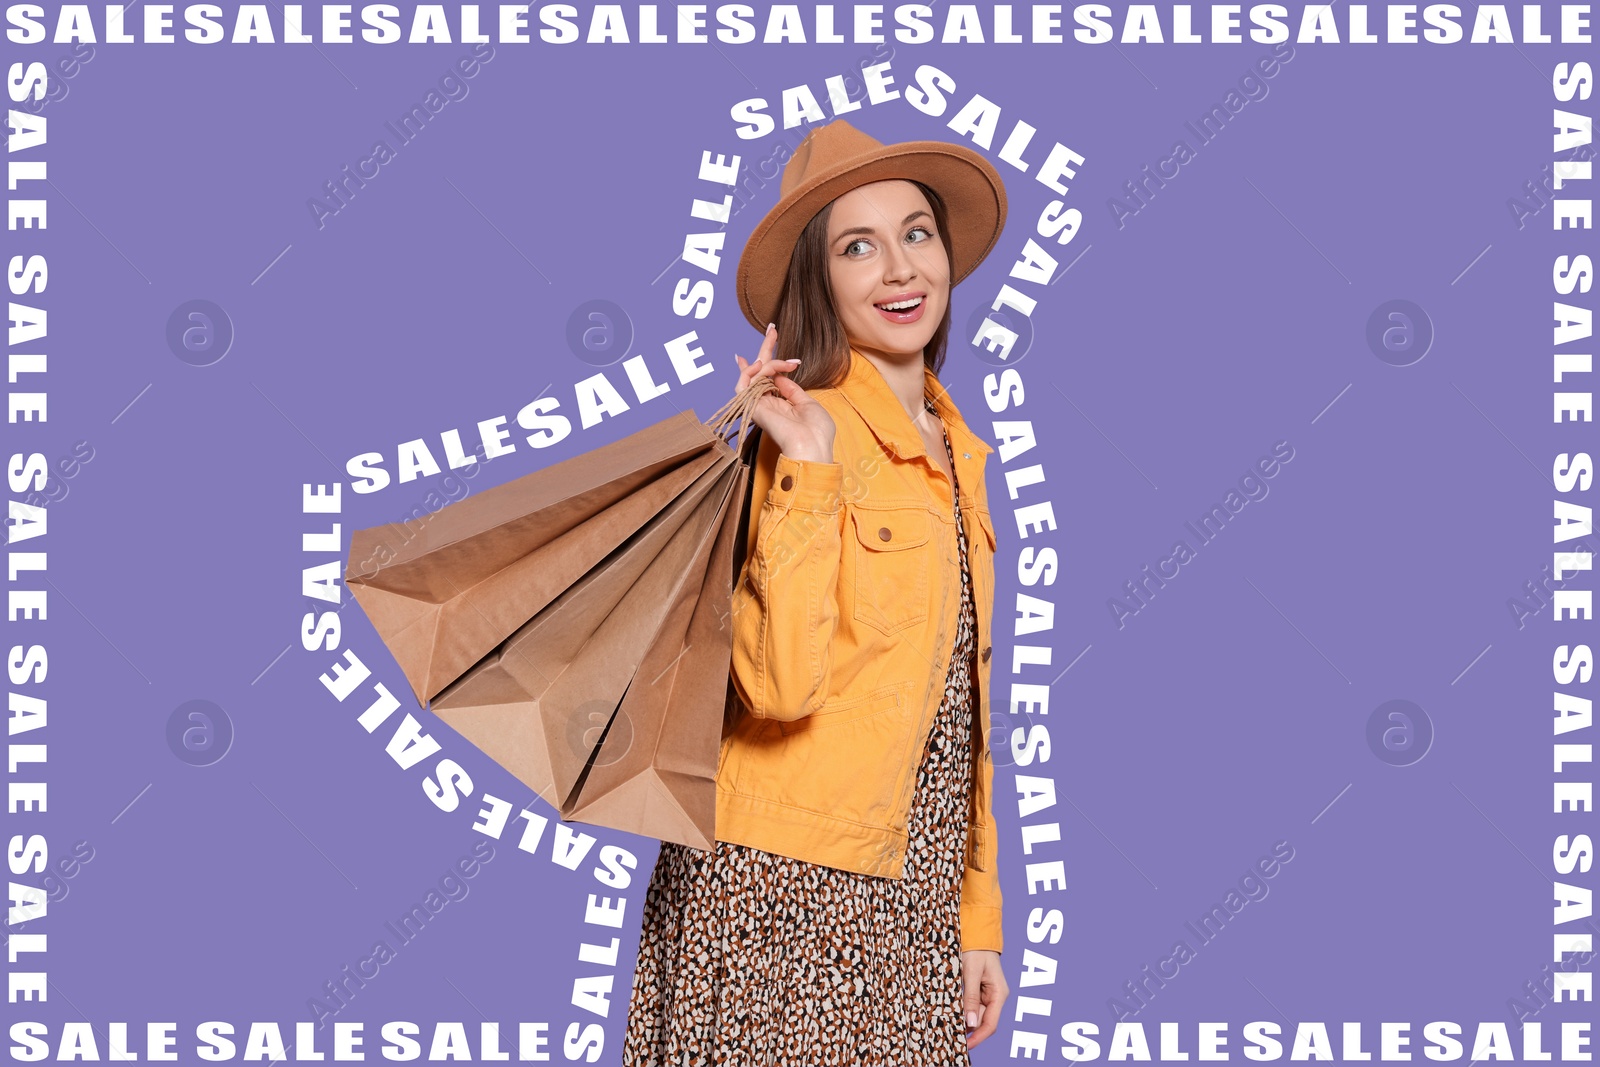 Image of Stylish young woman with shopping bags and words Sale on violet background